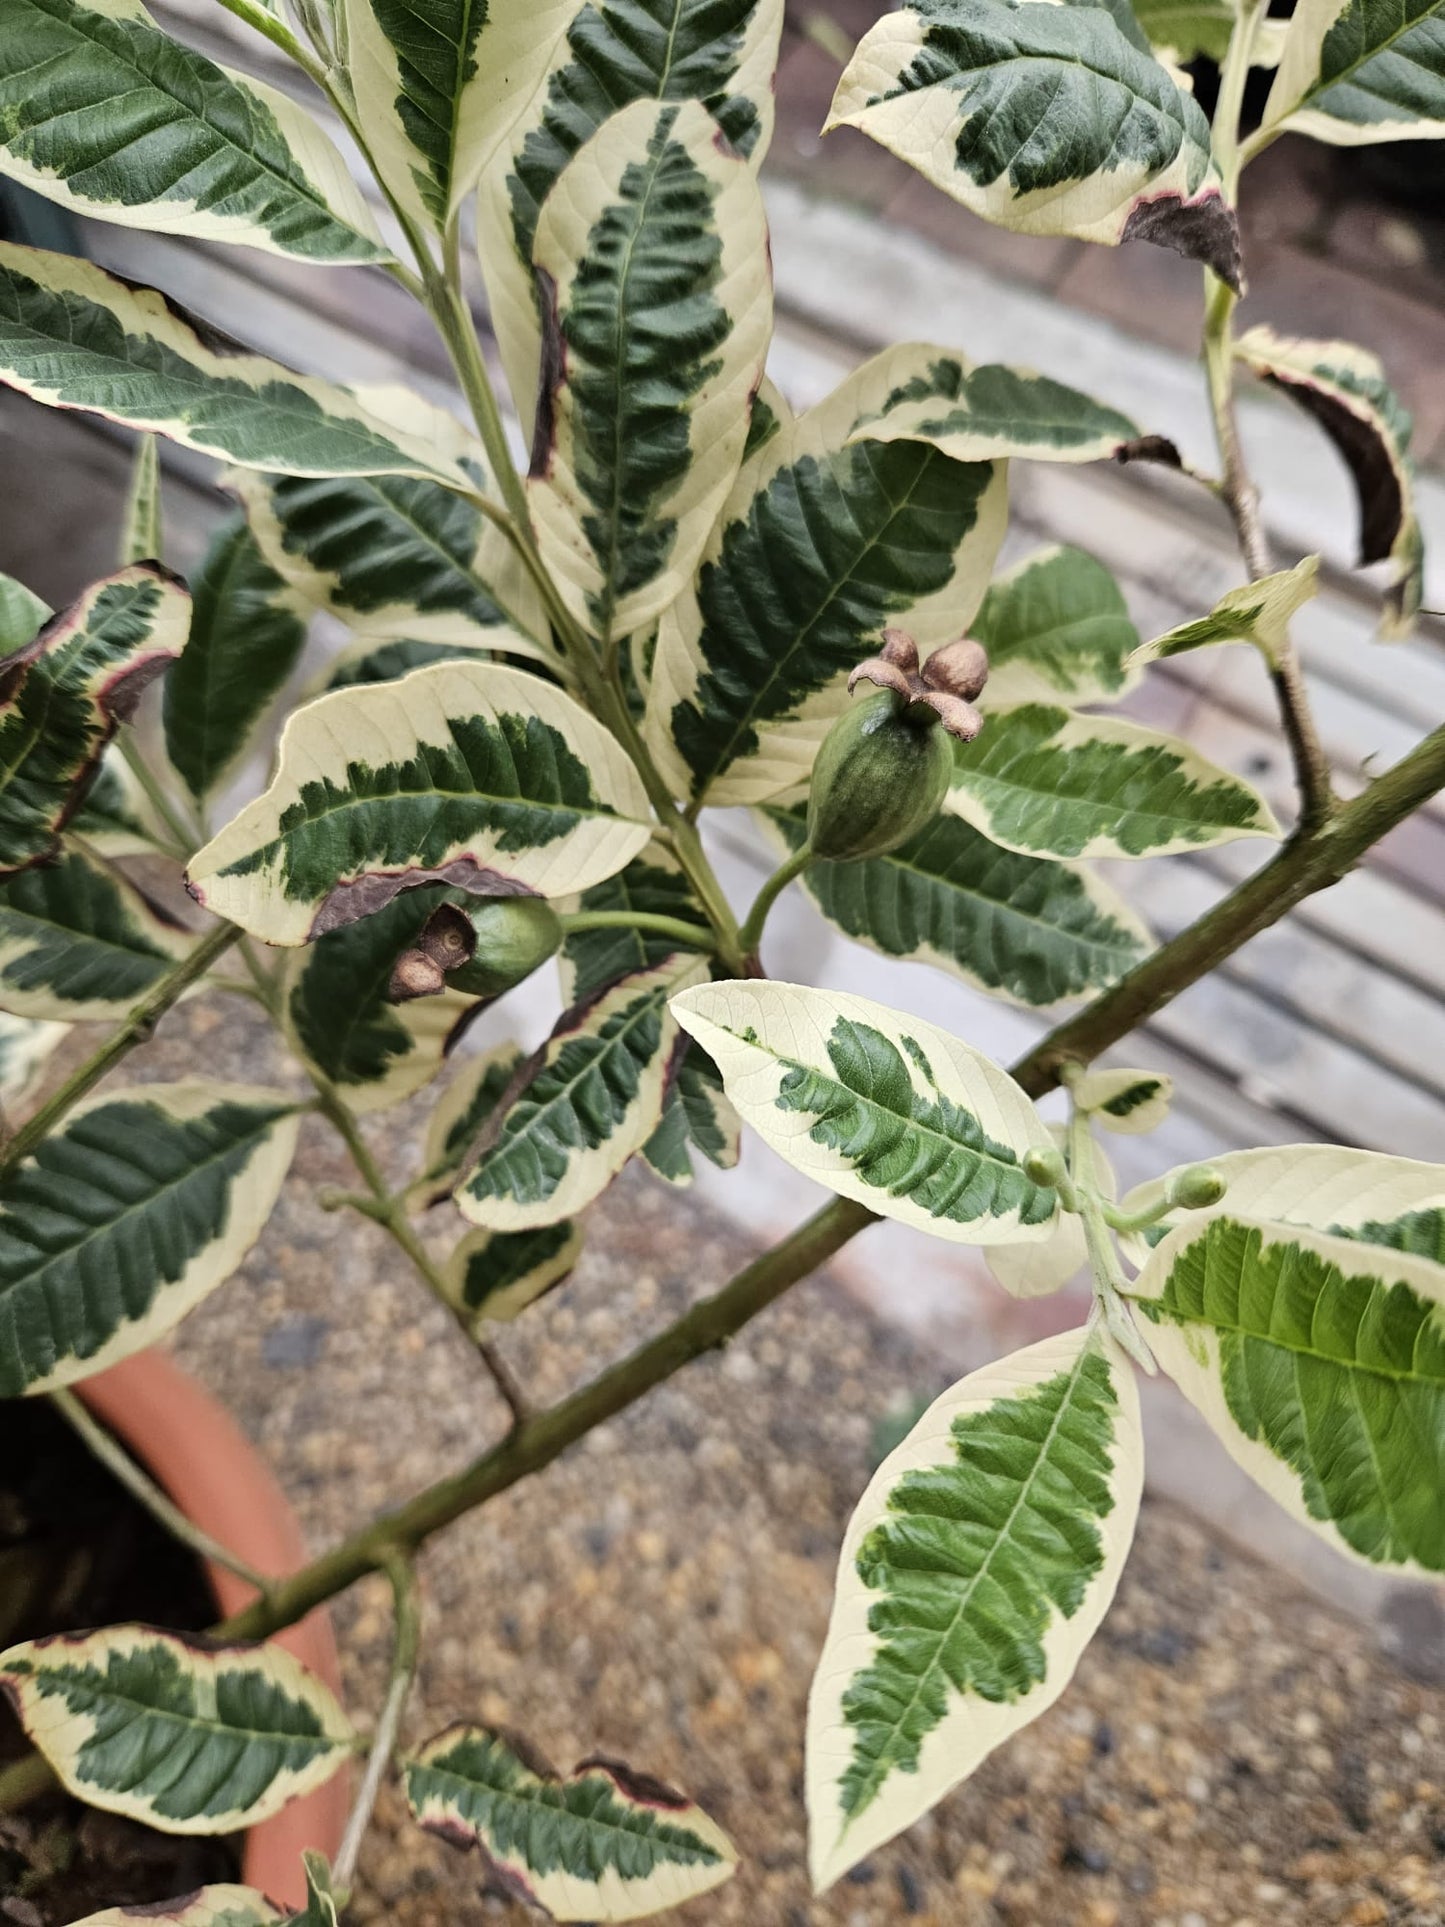 Variegated Pink Guava